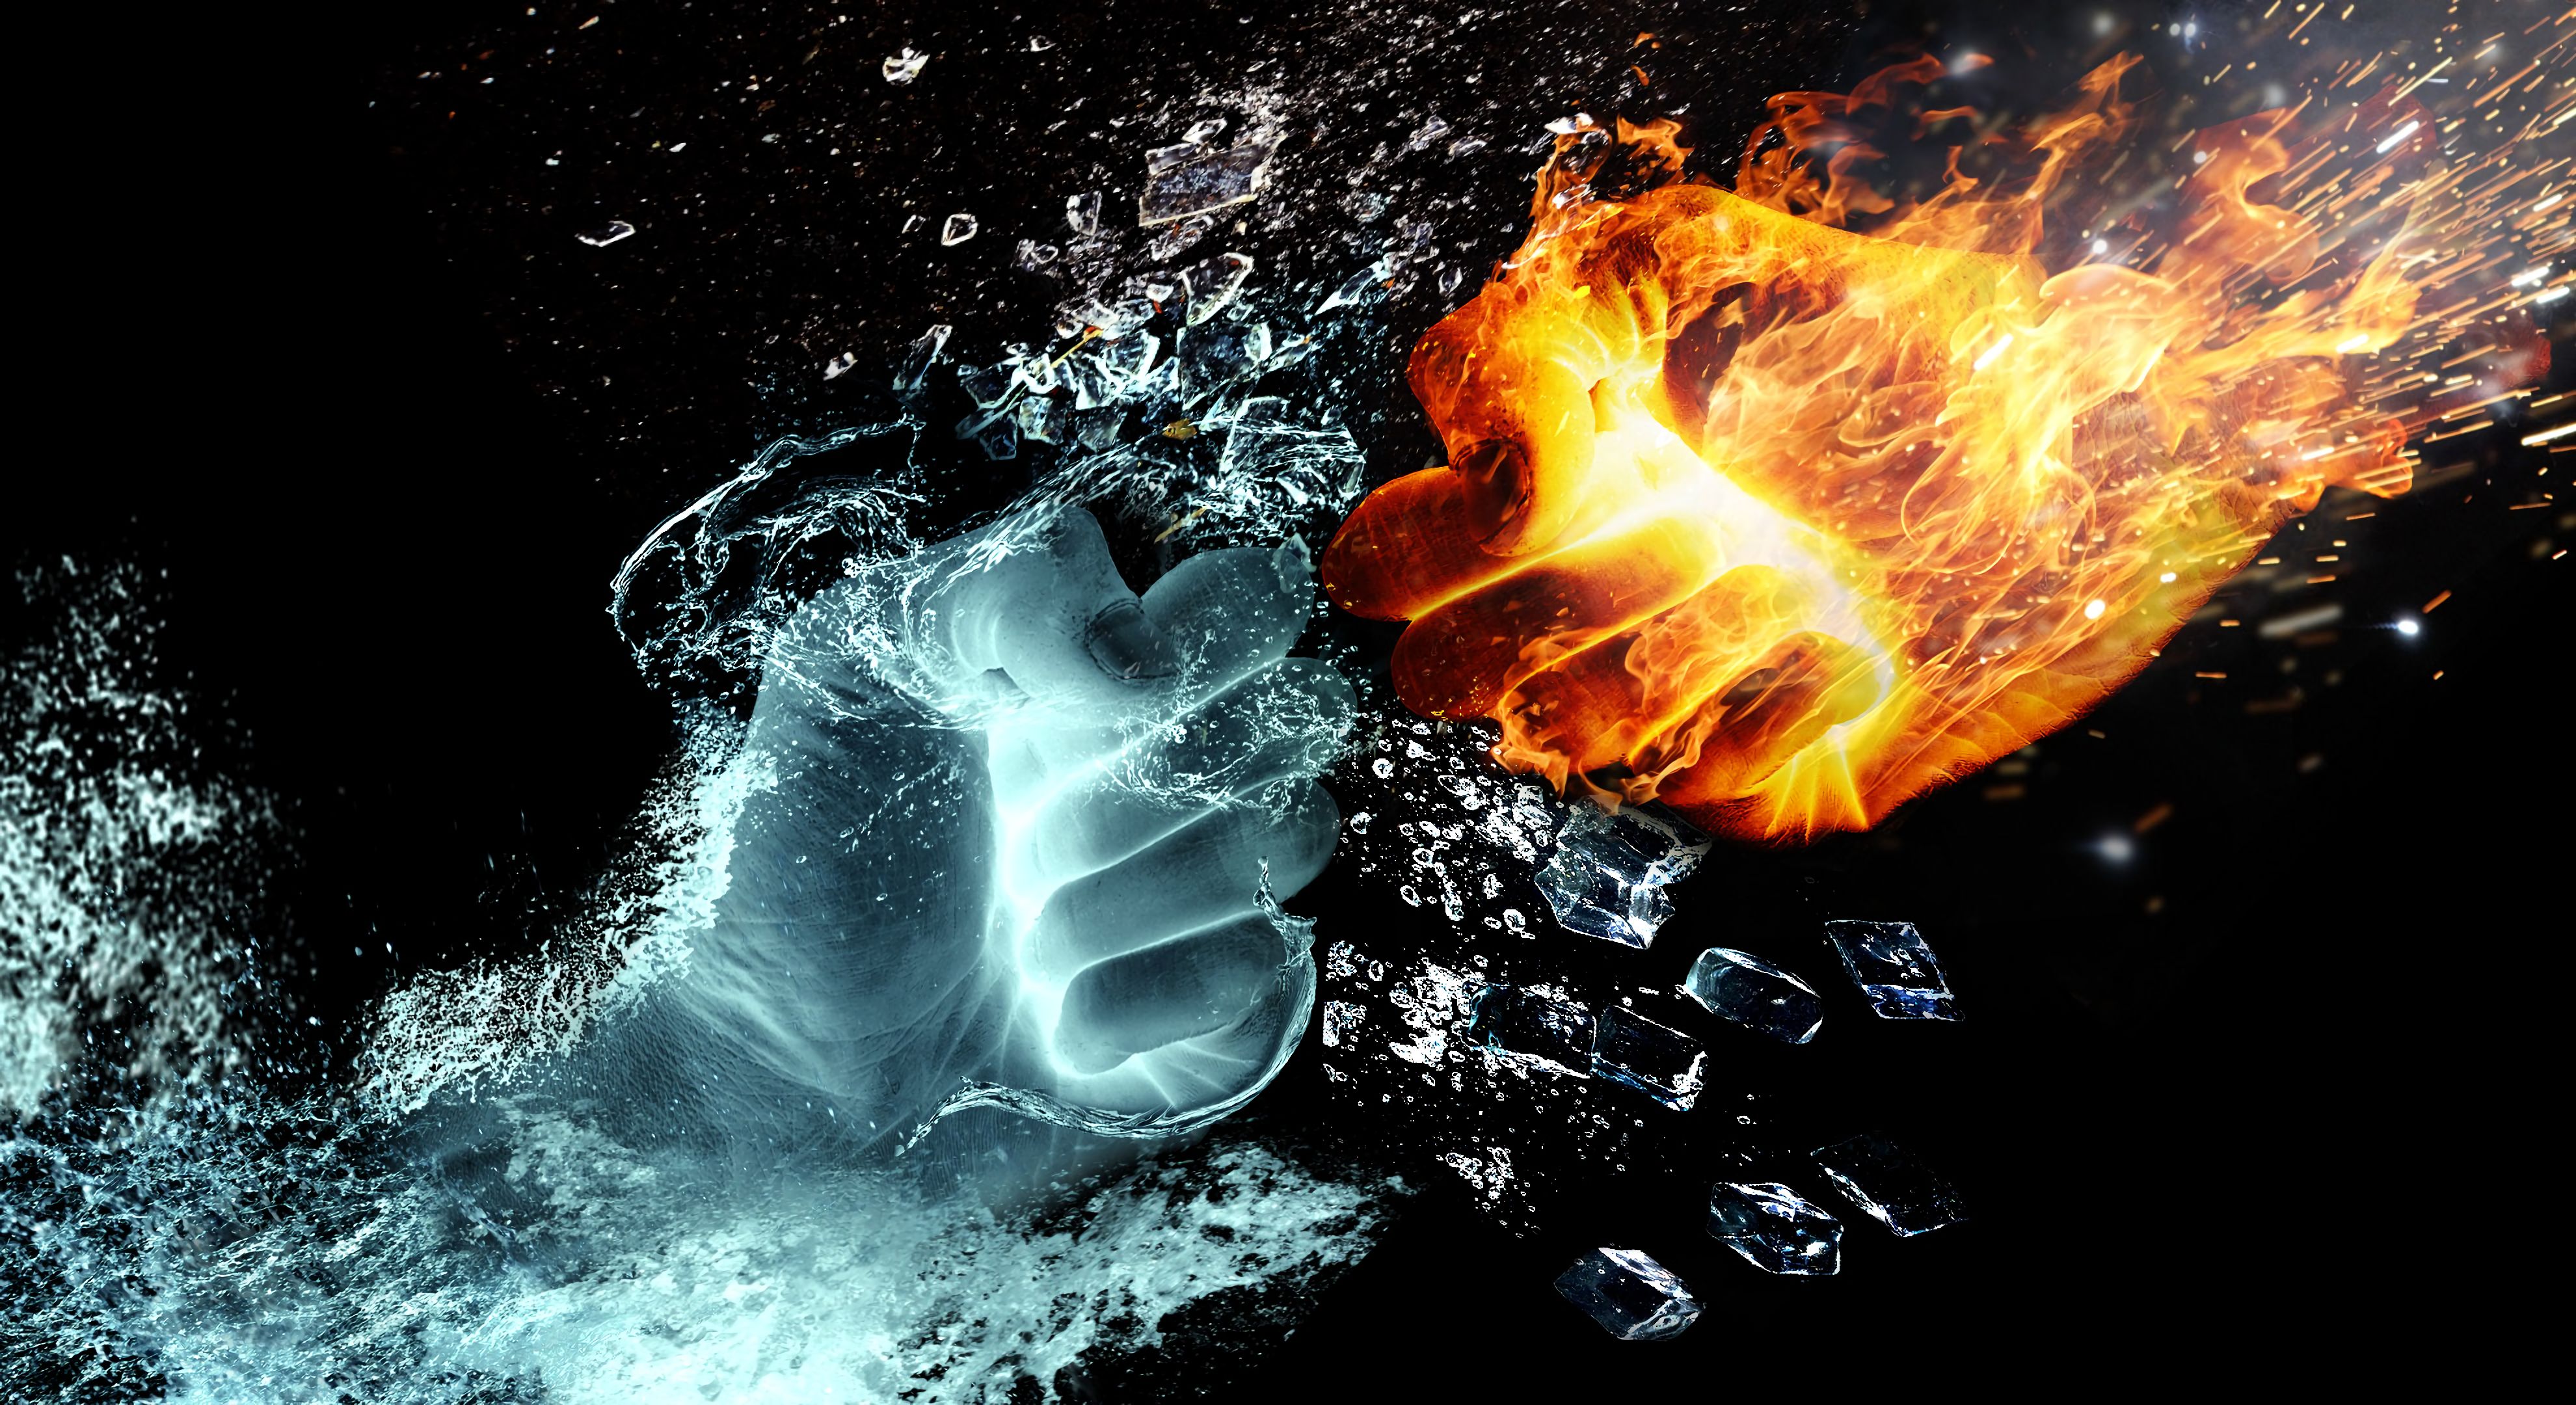 android fire, water, miscellanea, miscellaneous, spray, hands, shards, smithereens